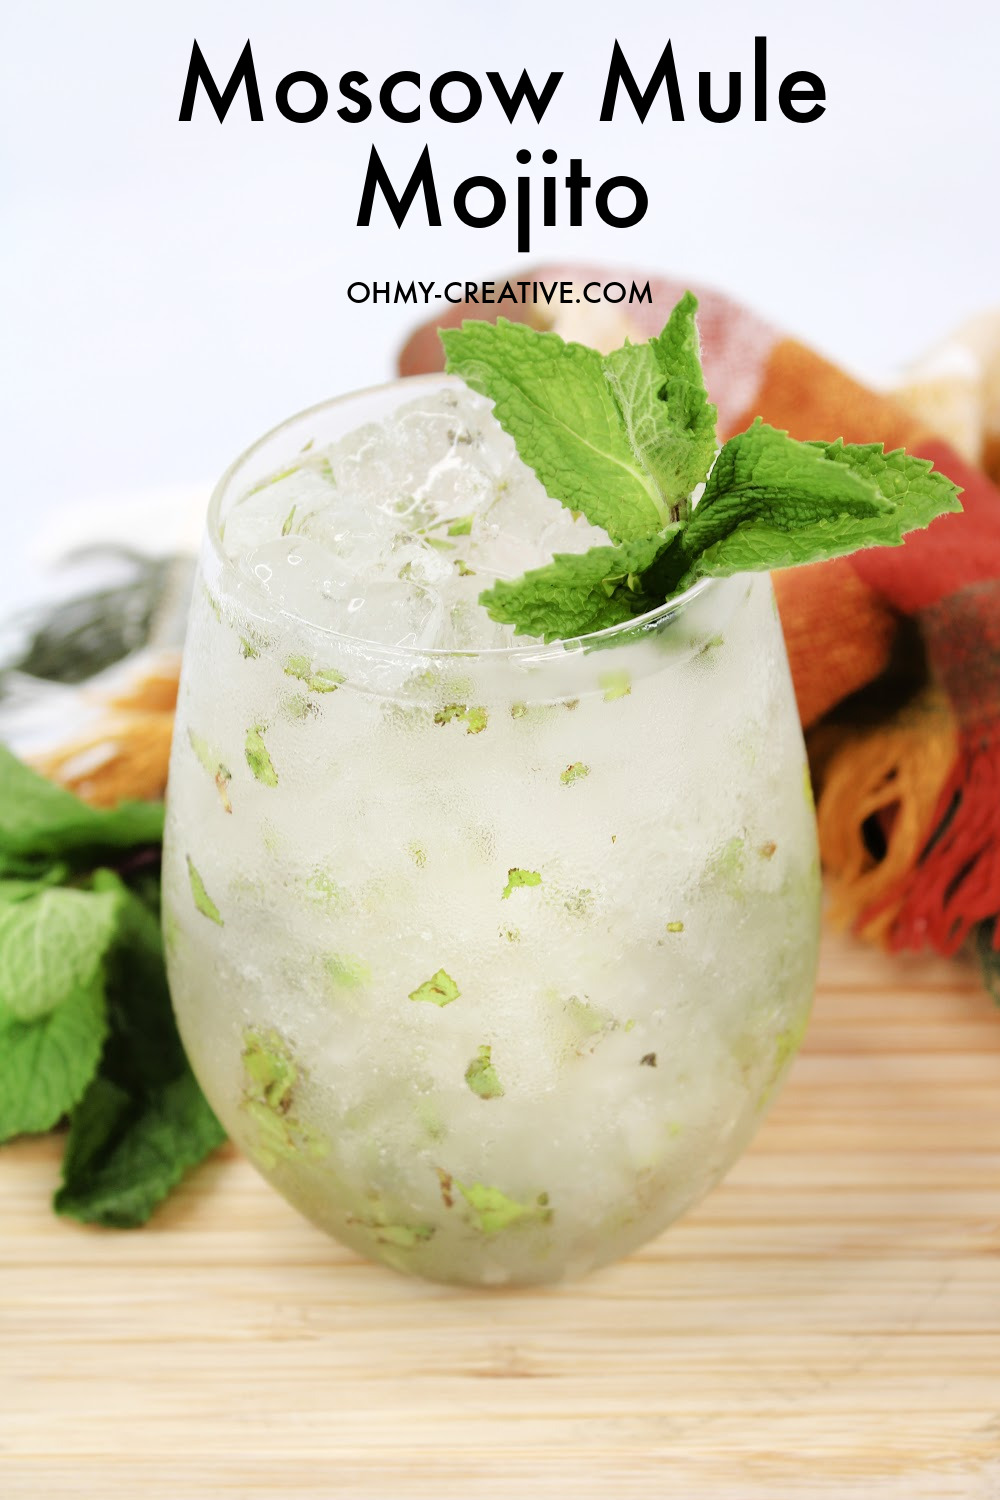 Moscow Mule Mojito With Ginger Beer